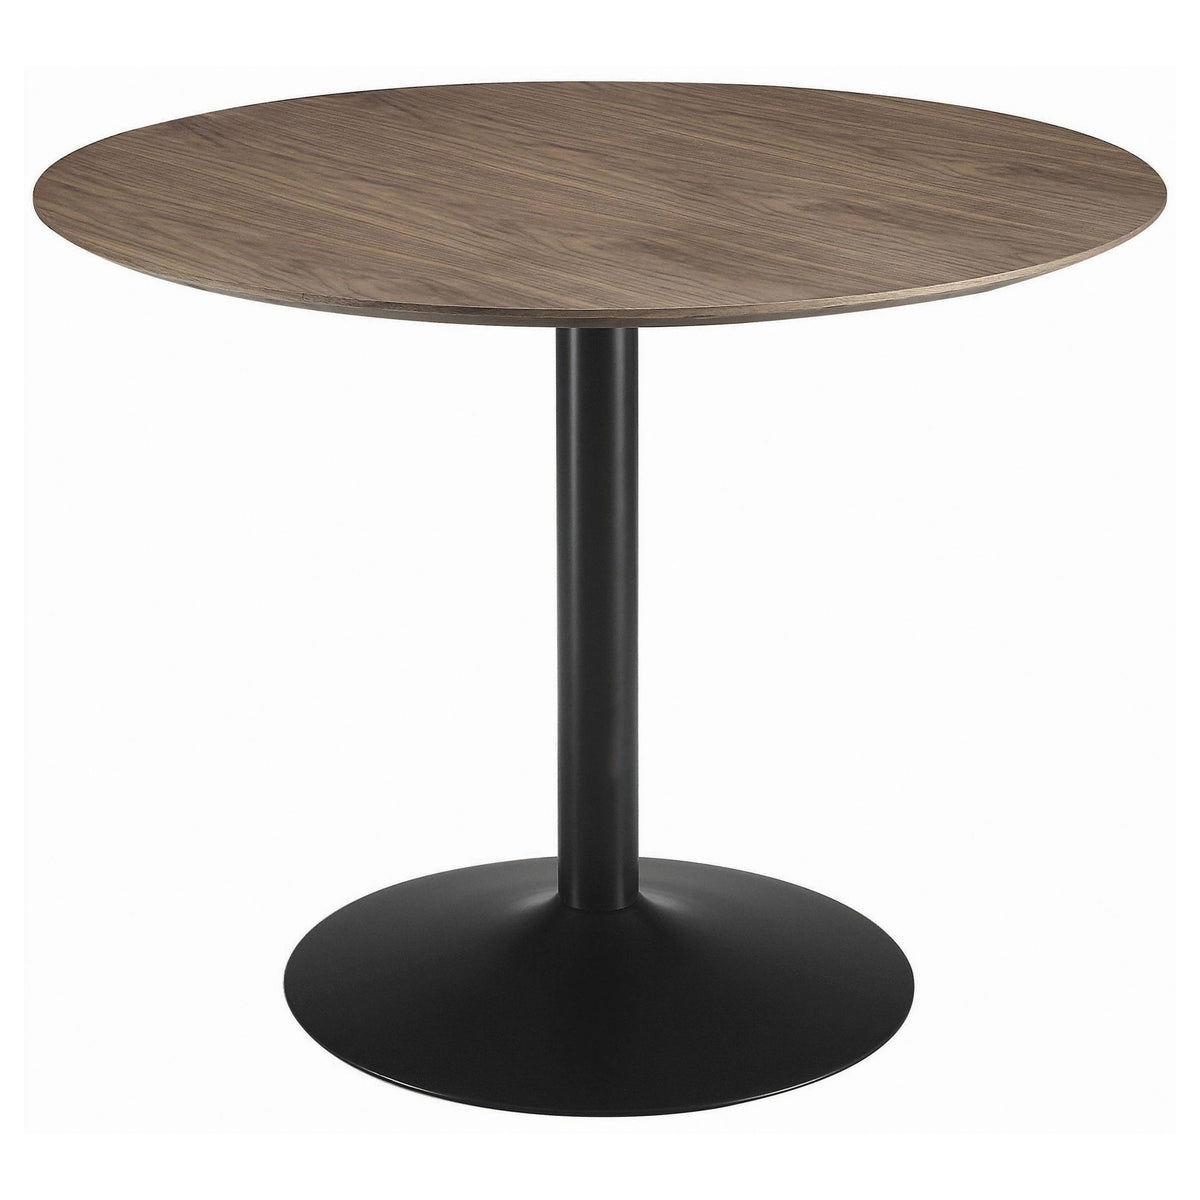 Cora Round Dining Table Walnut and Black  Las Vegas Furniture Stores